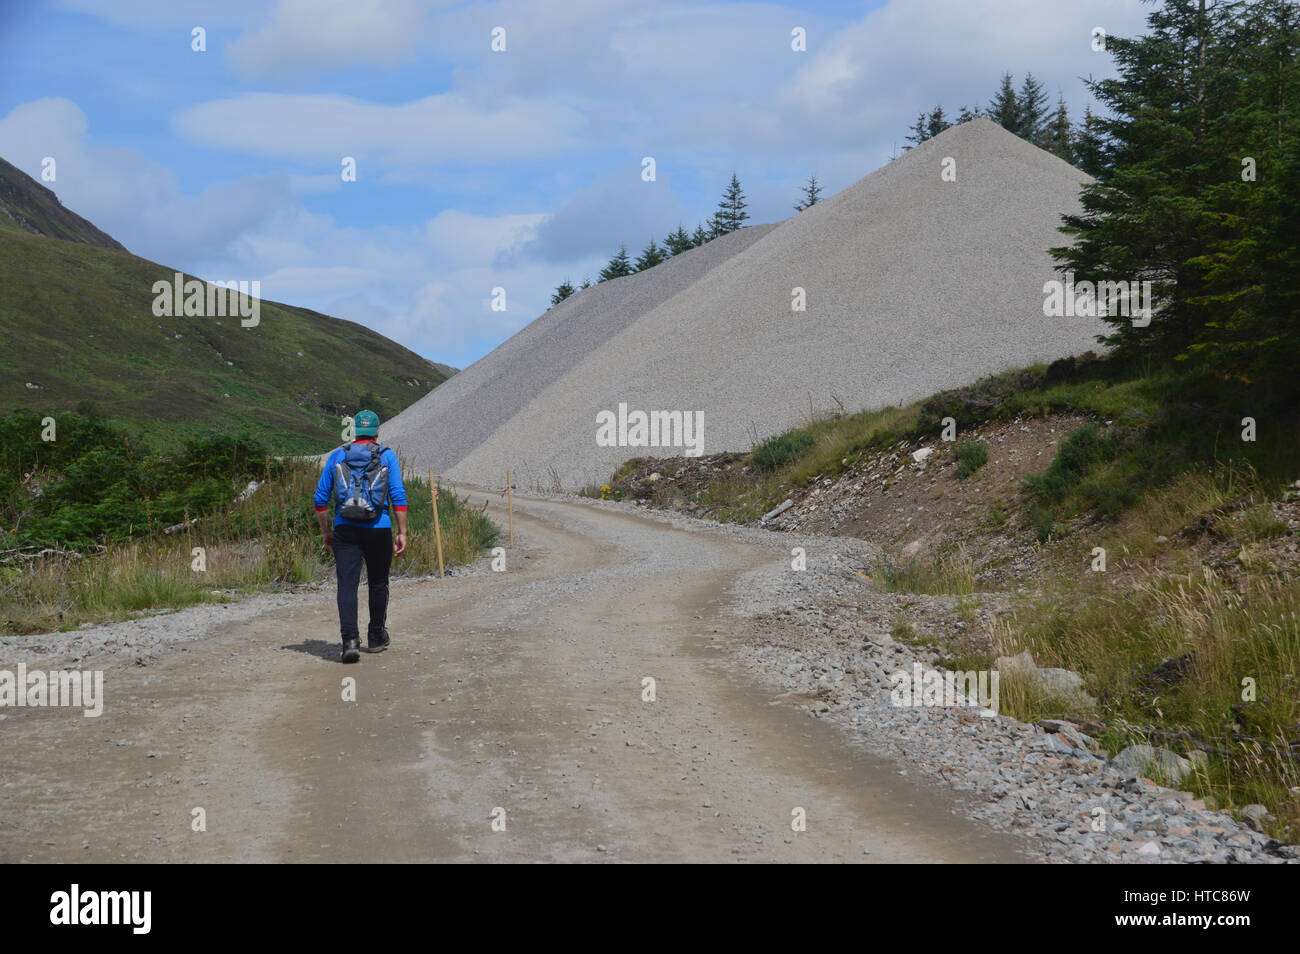 A Lone Male Hillwalker in Gleann Cia-aig Walking Through Constuction Site to the Scottish Mountain Corbett Meall na h-Eilde in the Scottish Highlands. Stock Photo